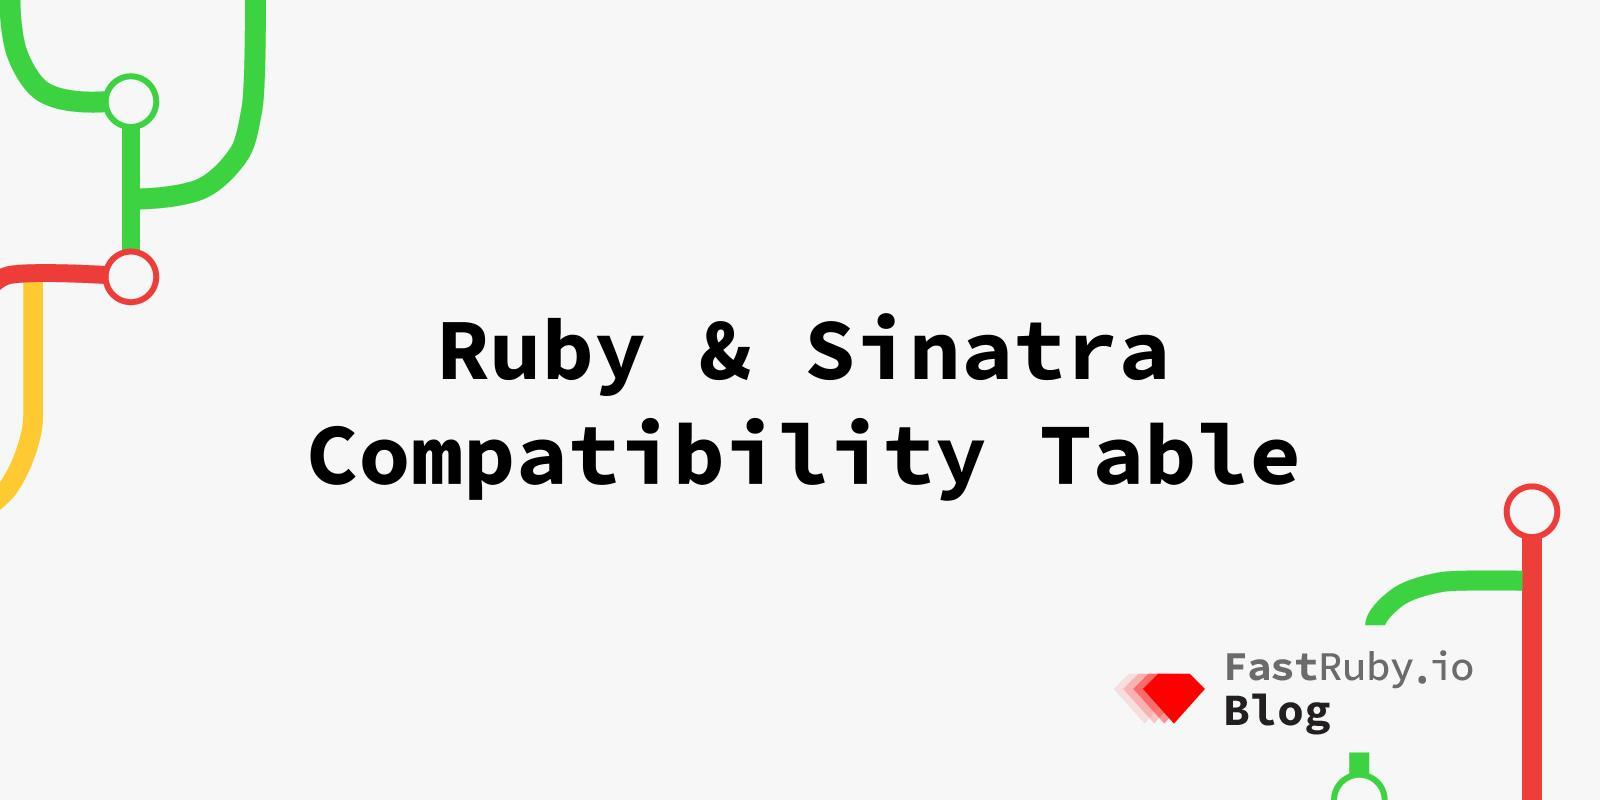 Ruby & Sinatra Compatibility Table